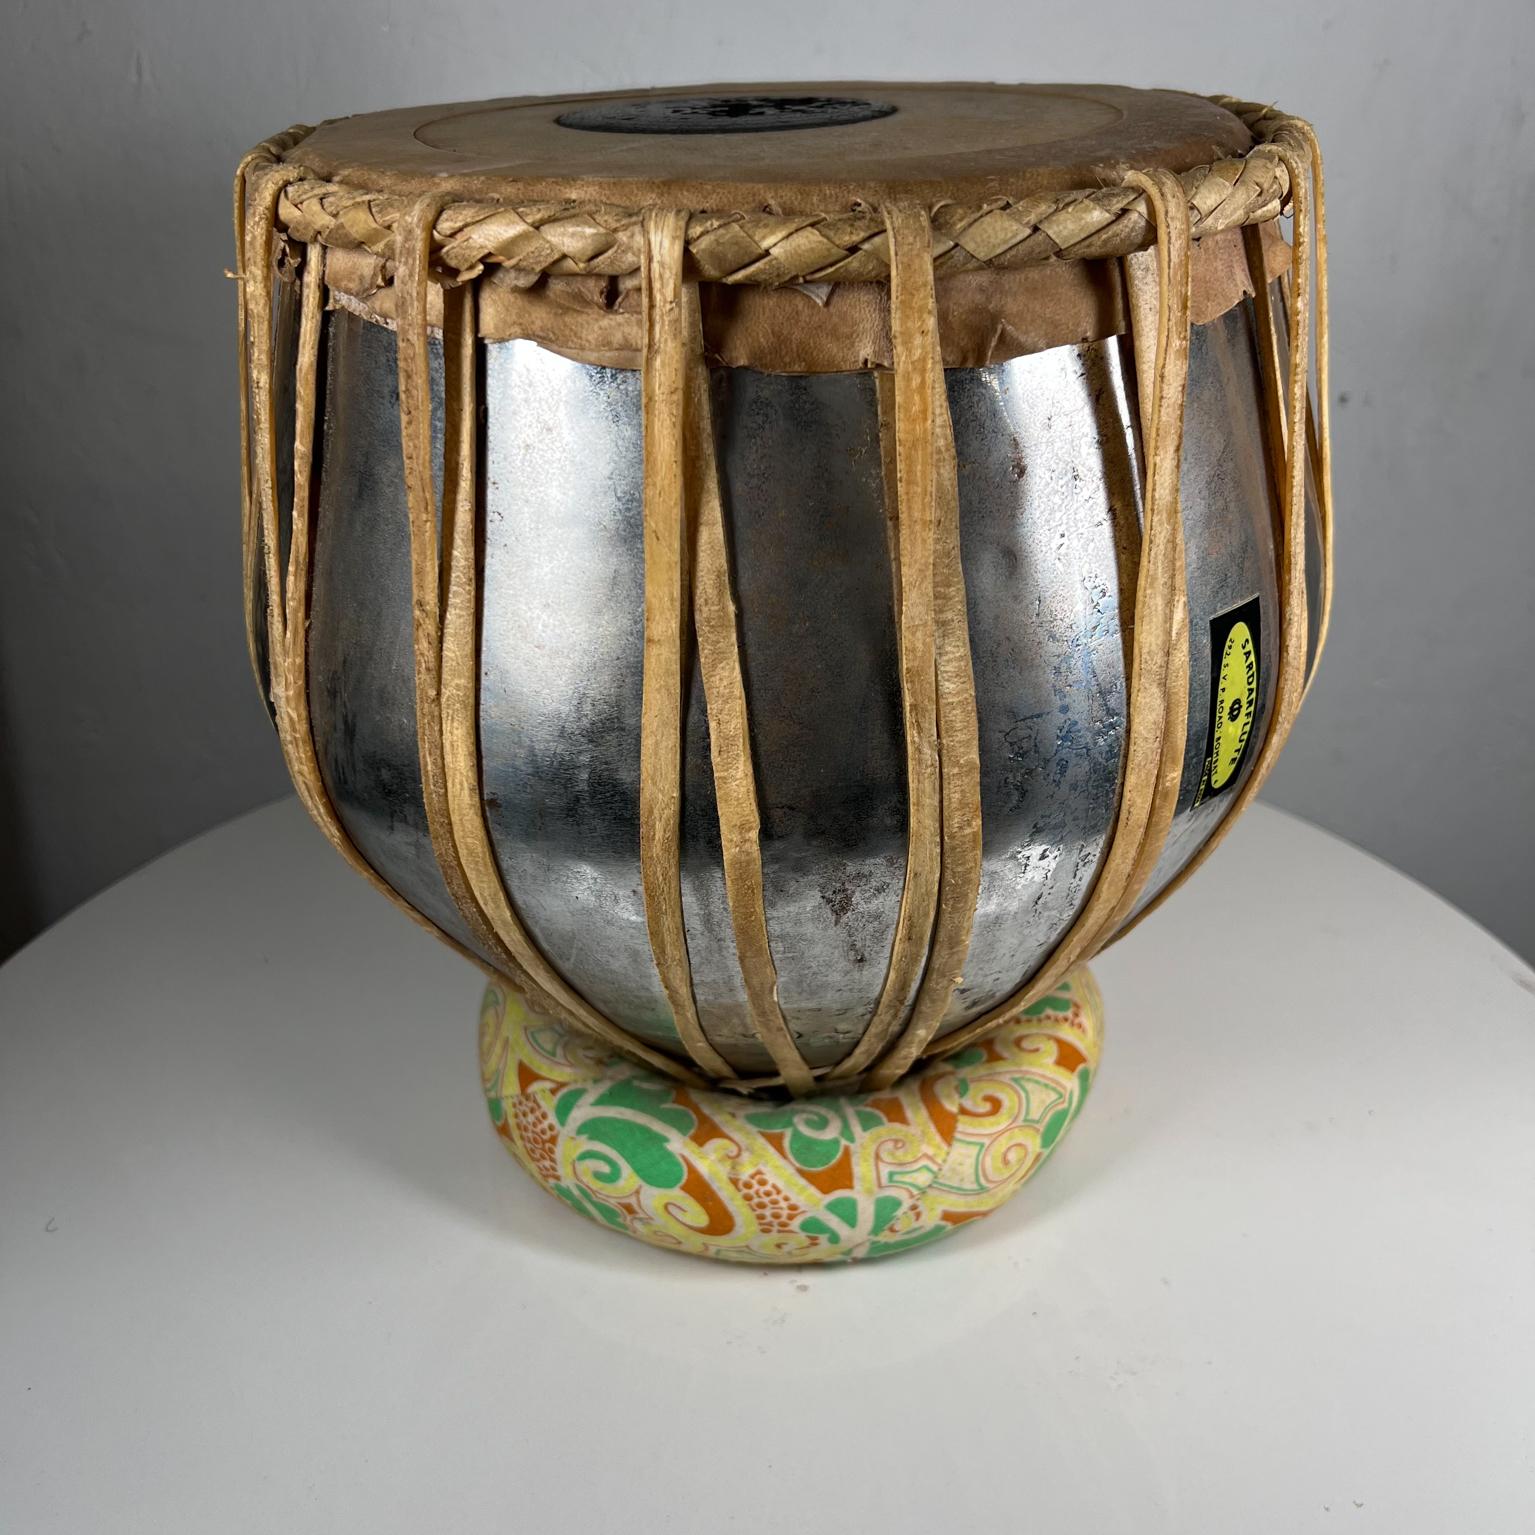 1970s Vintage steel tabla drum hand crafted sardarflute Bombay India.
Measures: 12 tall x 11.5 diameter.
Original vintage condition unrestored.
Refer to images provided.